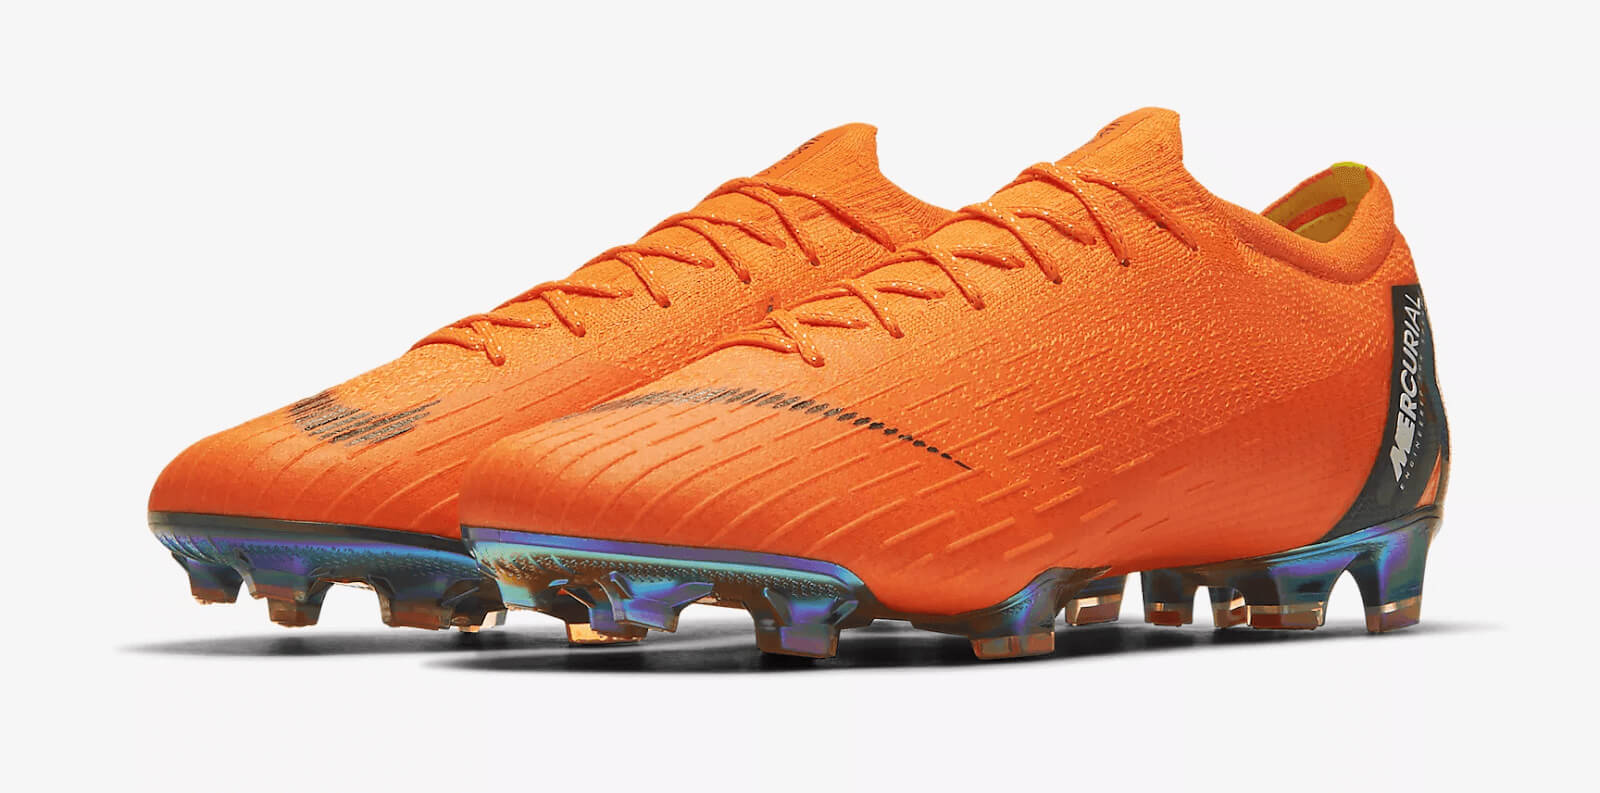 Nike Mercurial Vapour XII Elite - Football boot of the day